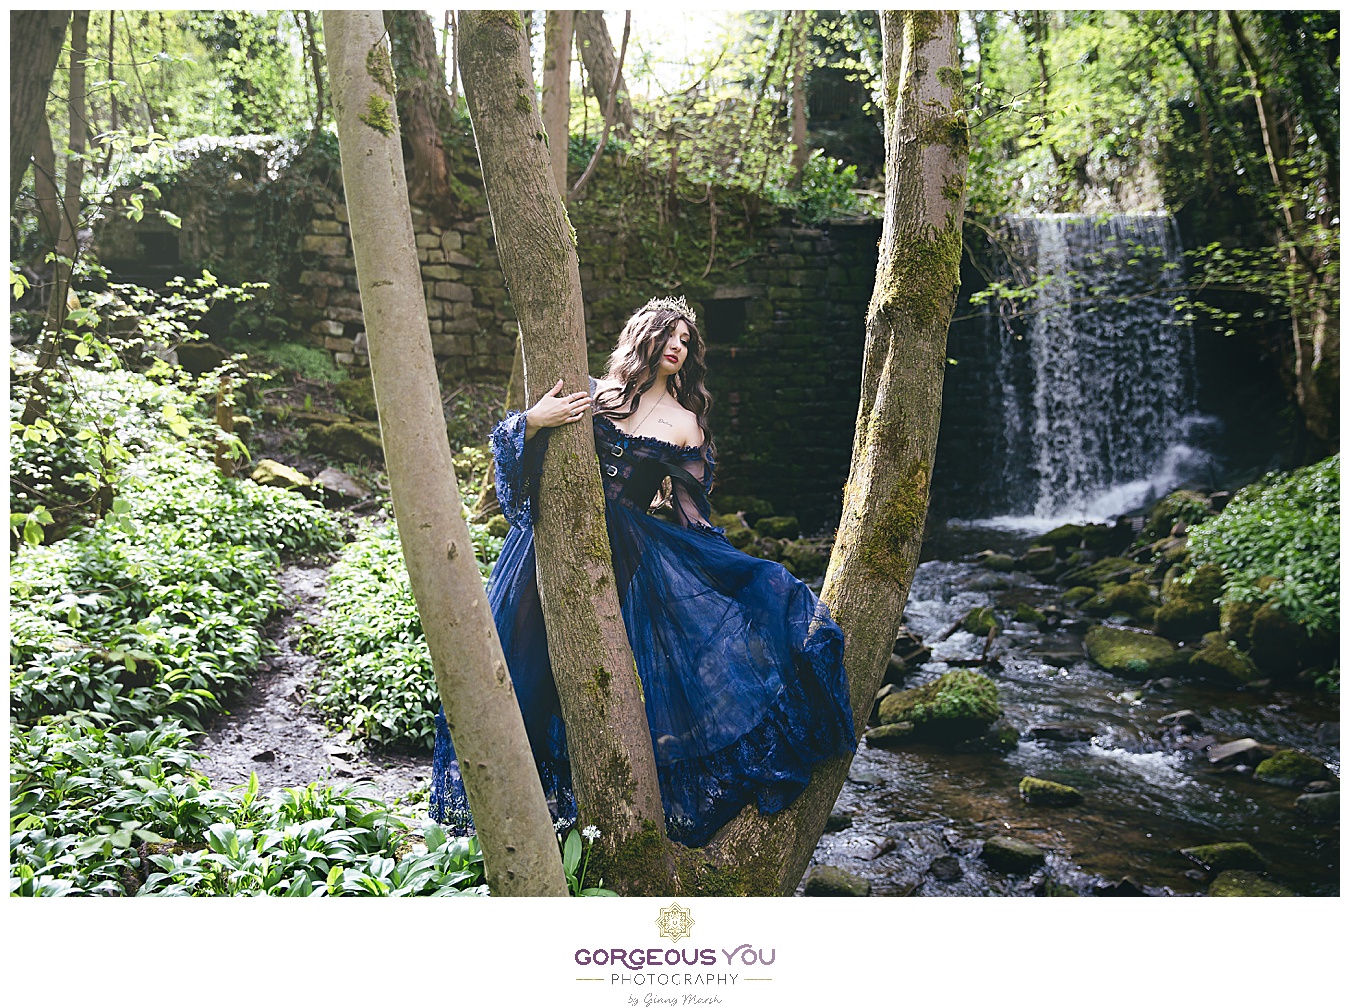 Navy tulle dress with black bodice in front of a waterfall, wearing a crown | Divine feminine goddess boudoir photoshoot | Gorgeous You Photography | North Yorkshire